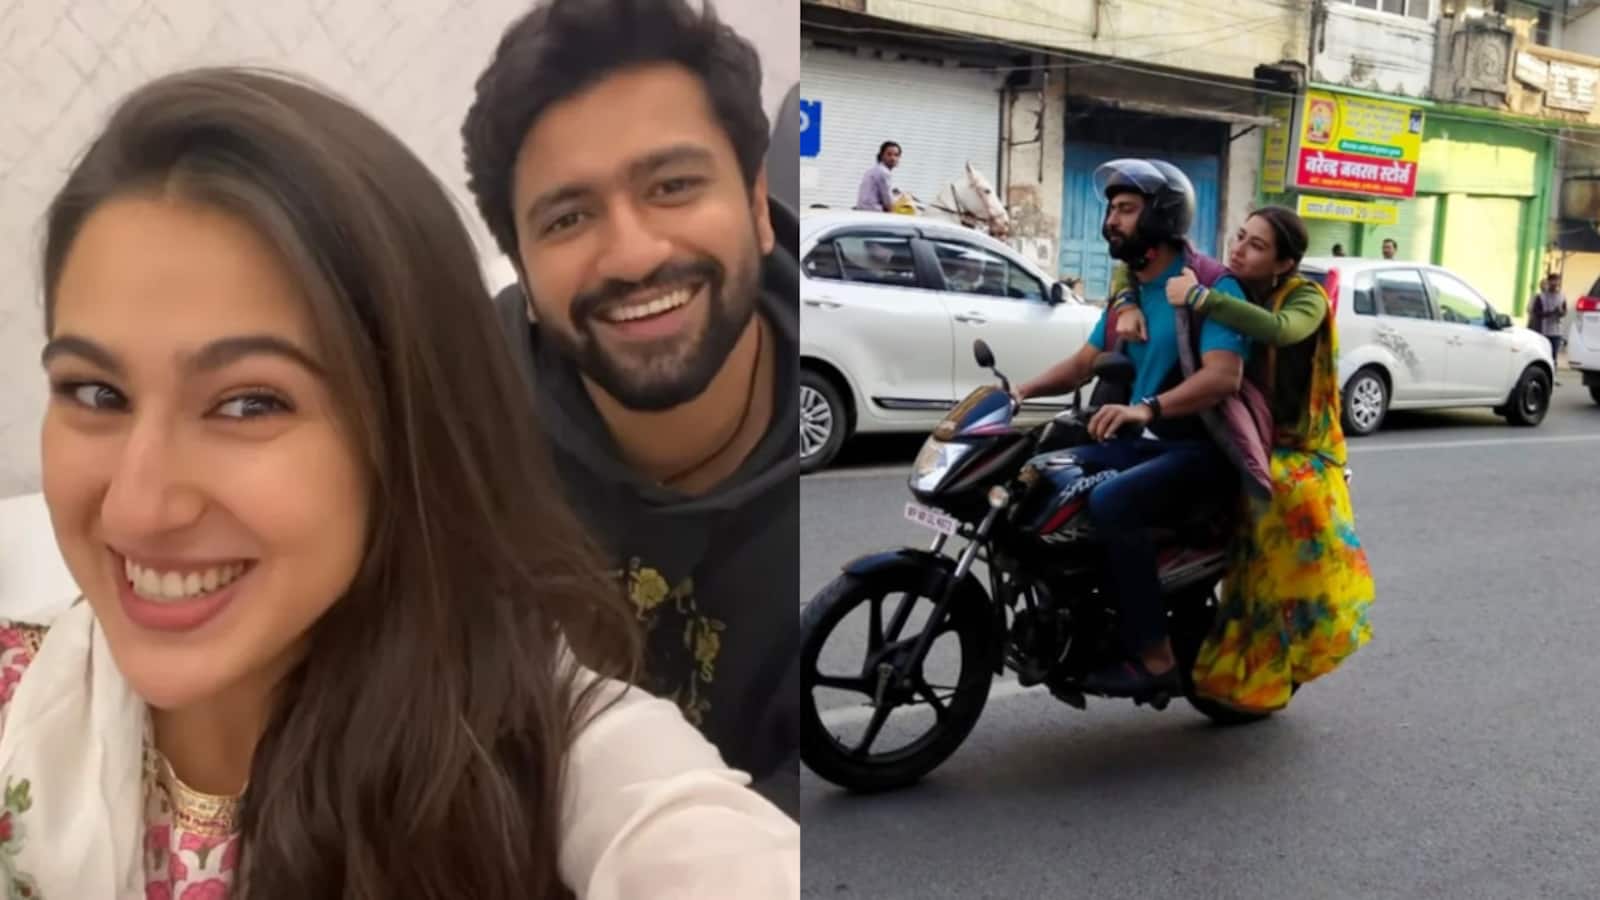 Vicky Kaushal in legal trouble for 'illegal use of motorcycle number plate'; complaint filed over a viral pic with Sara Ali Khan